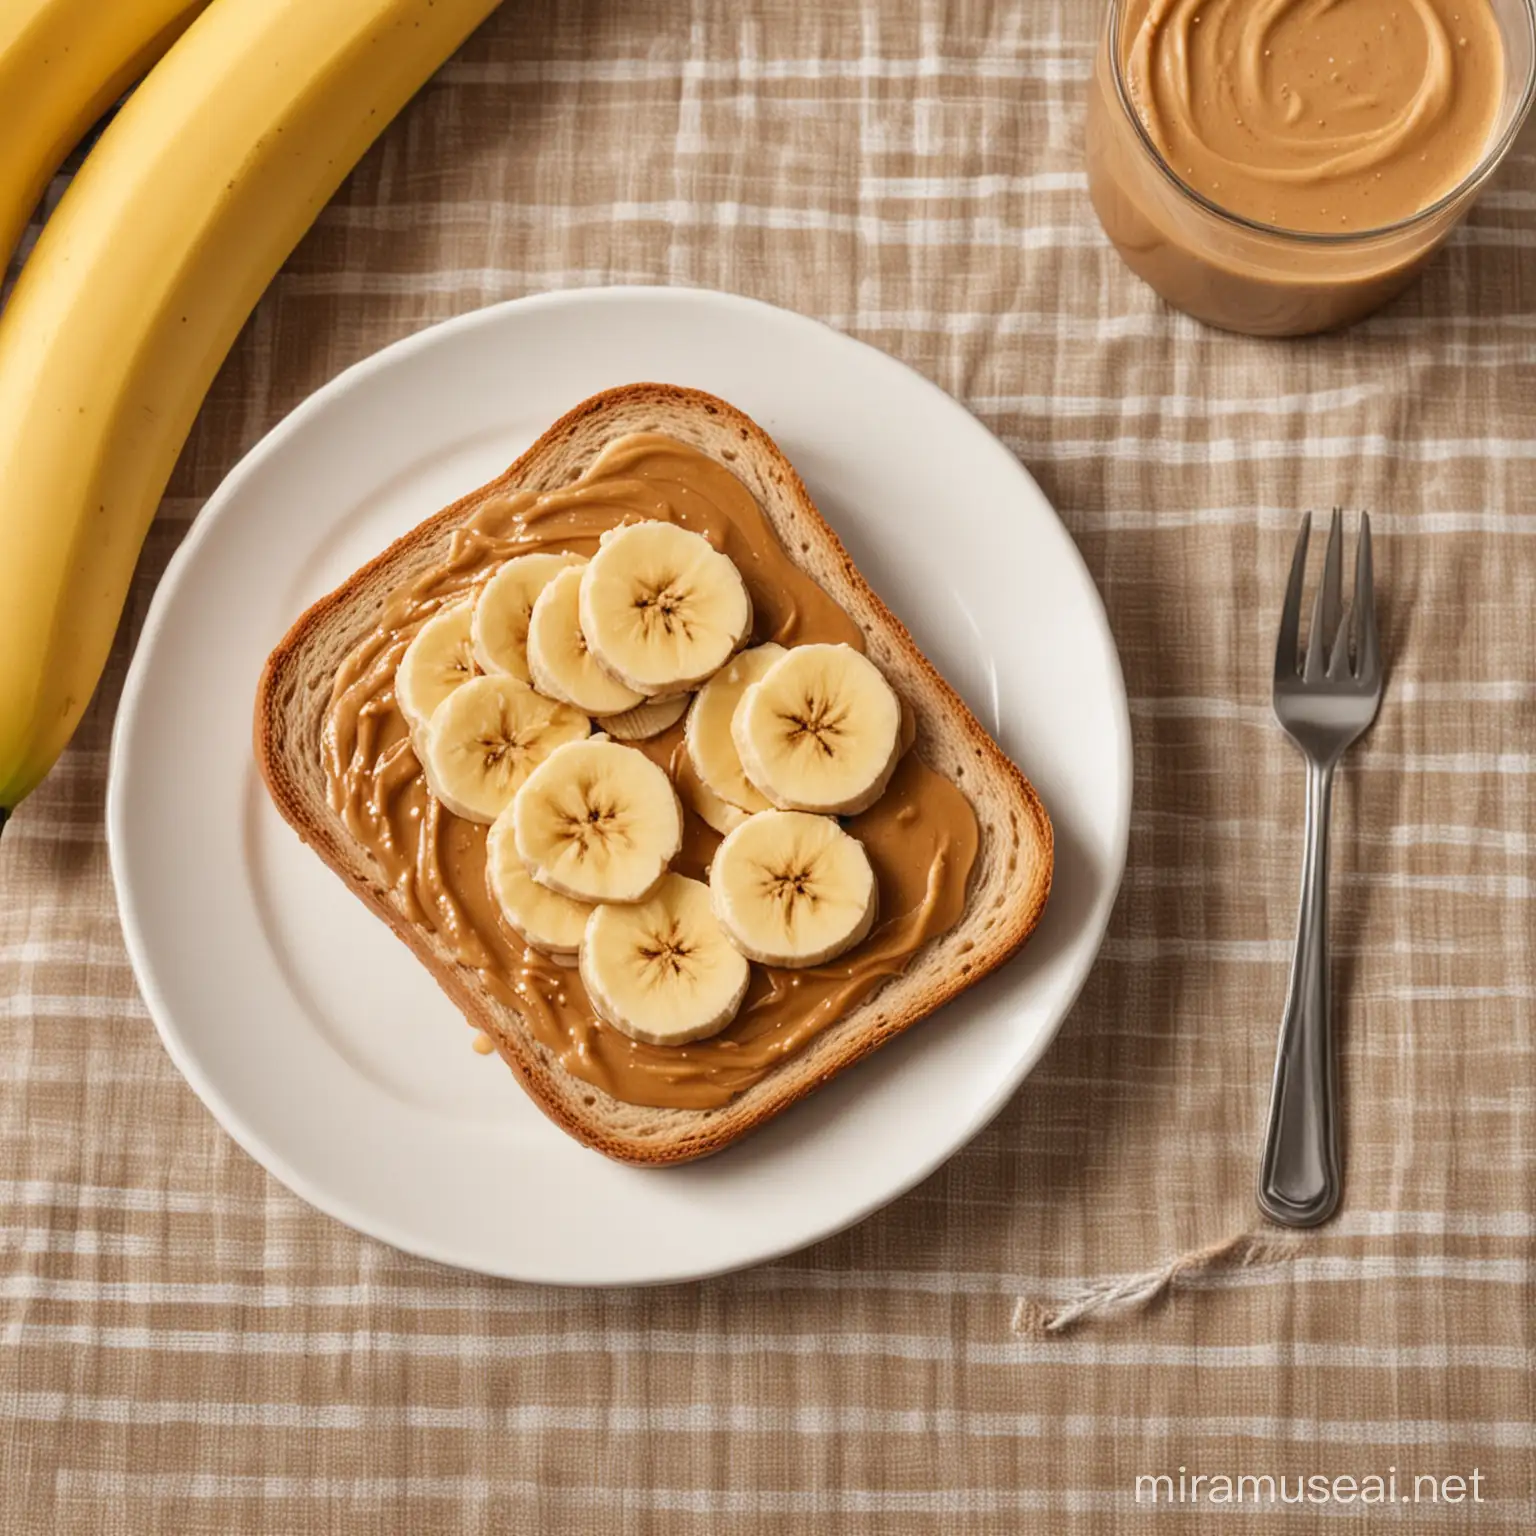 a toast with peanut Butter and banana on it in a plate on a table with a nice tablecloth